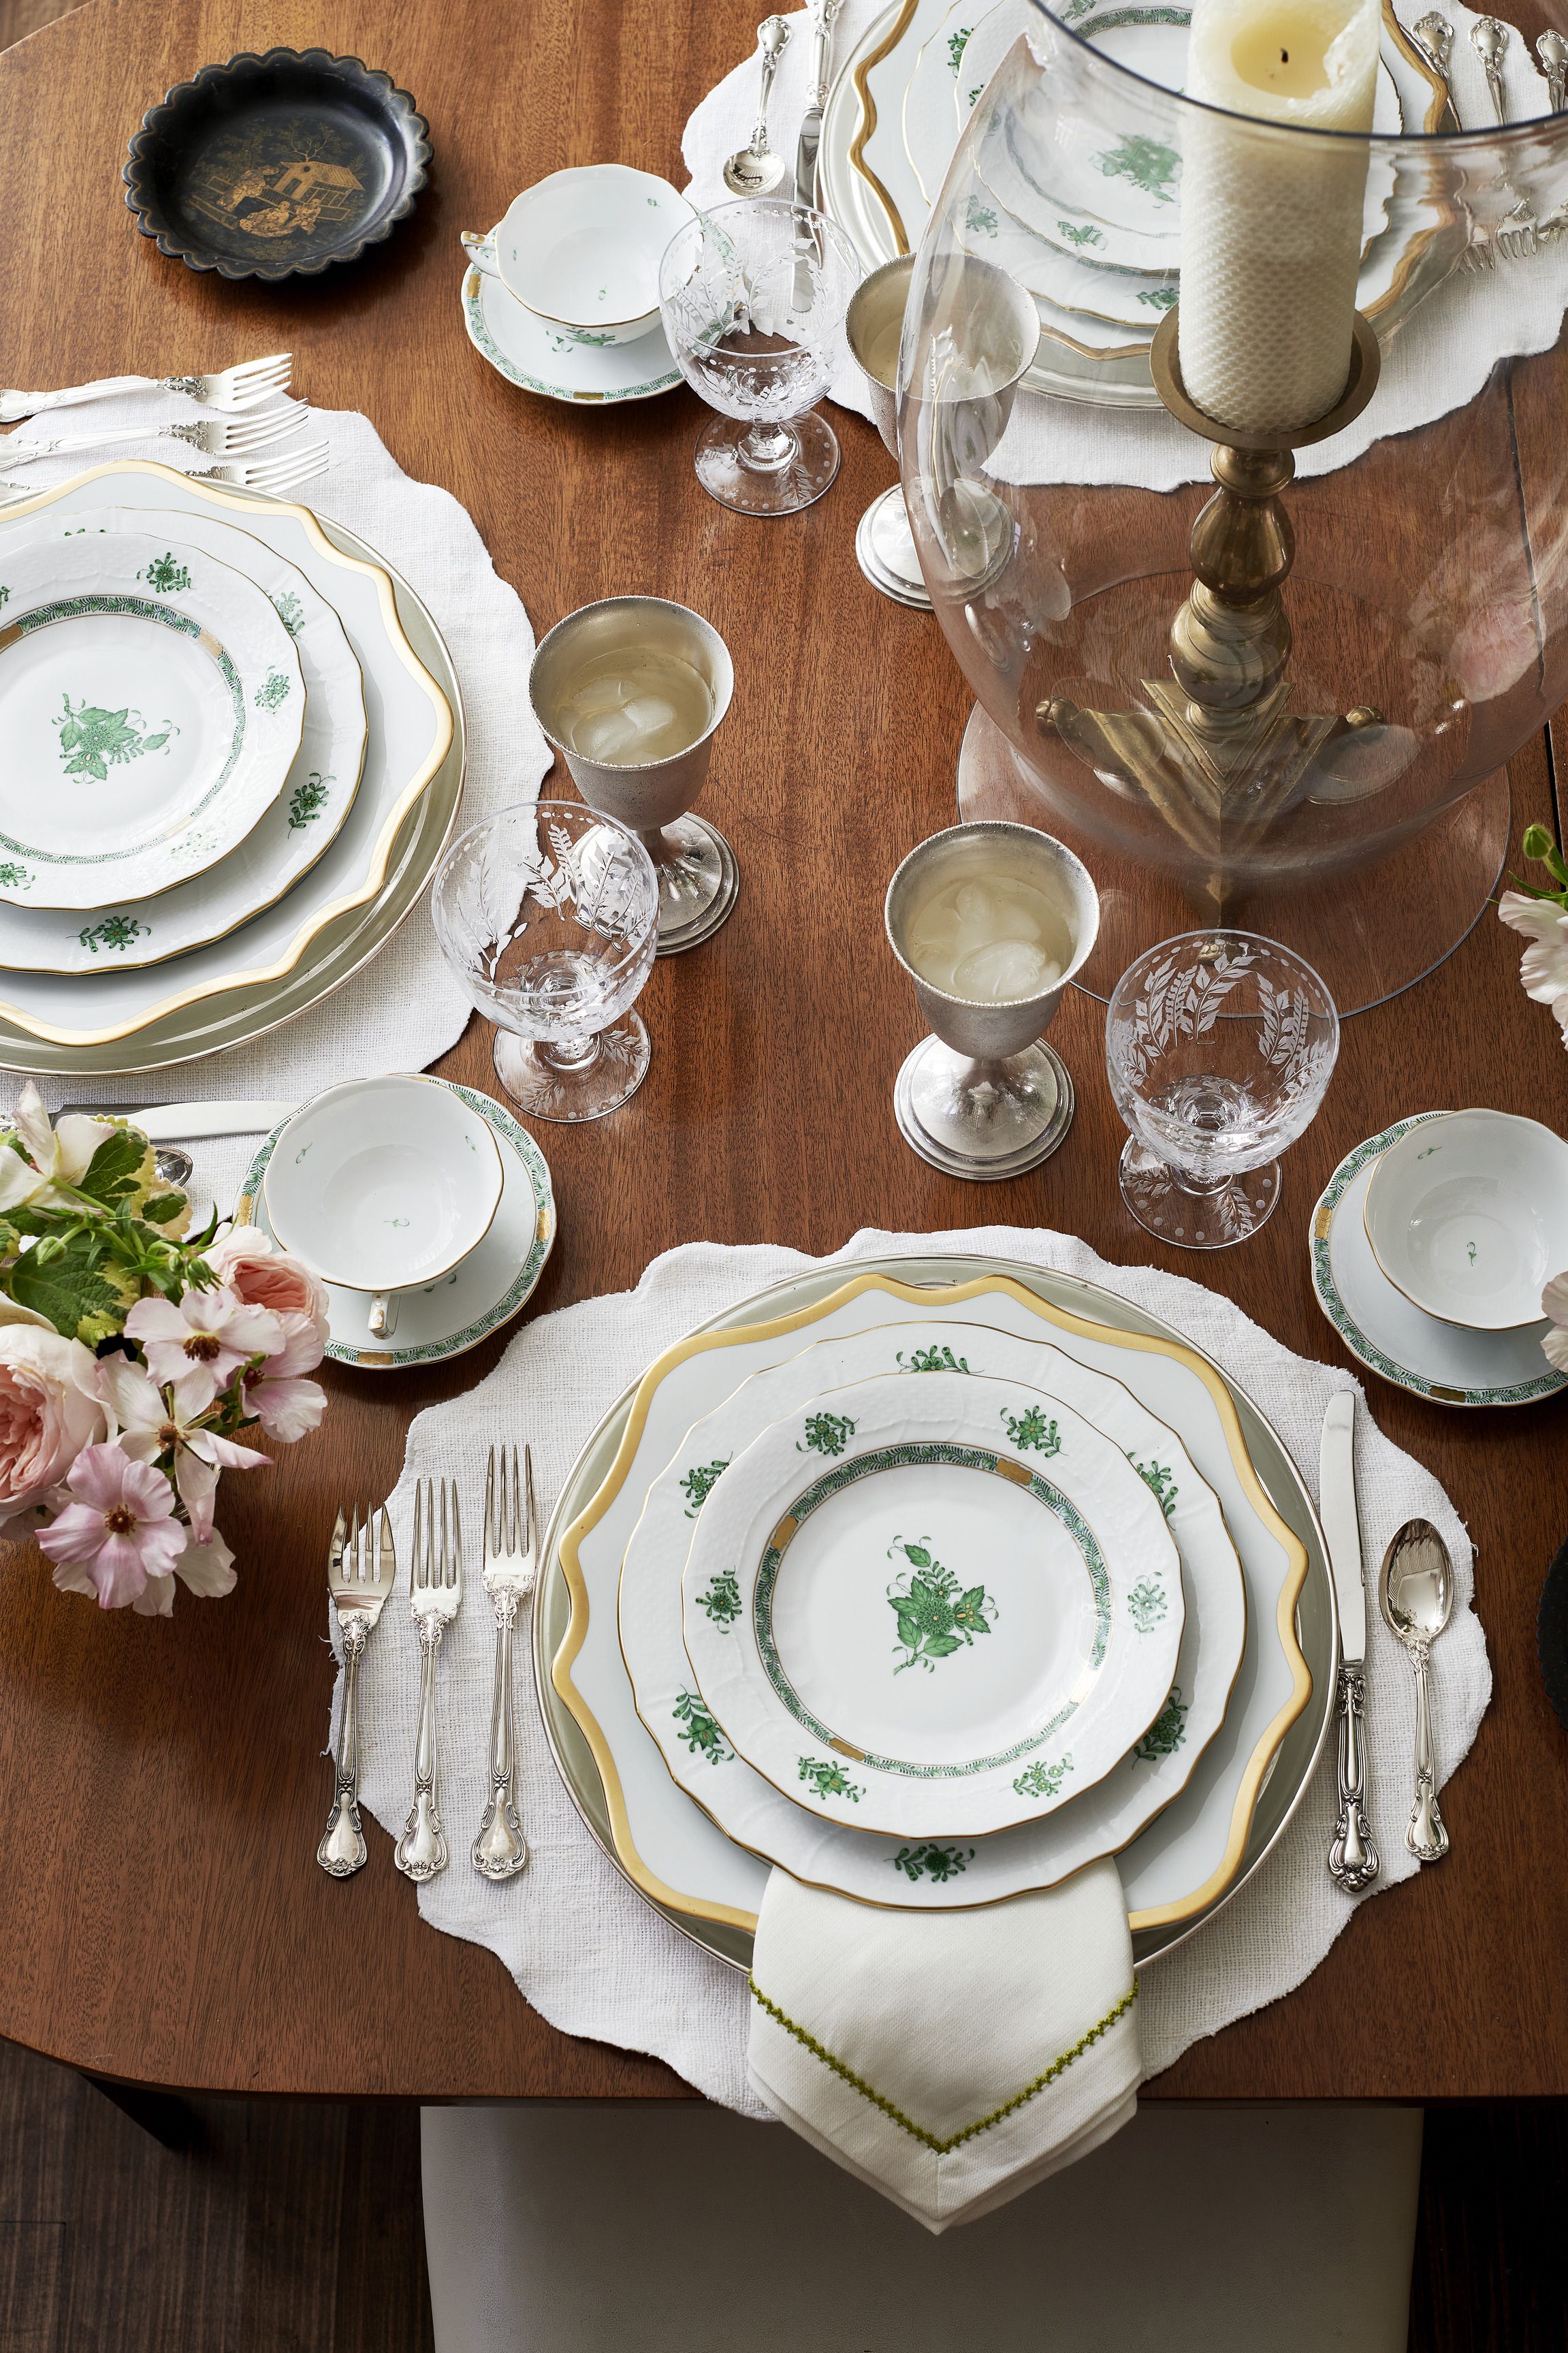 A Fresh Look at Classic Decor and Table Settings